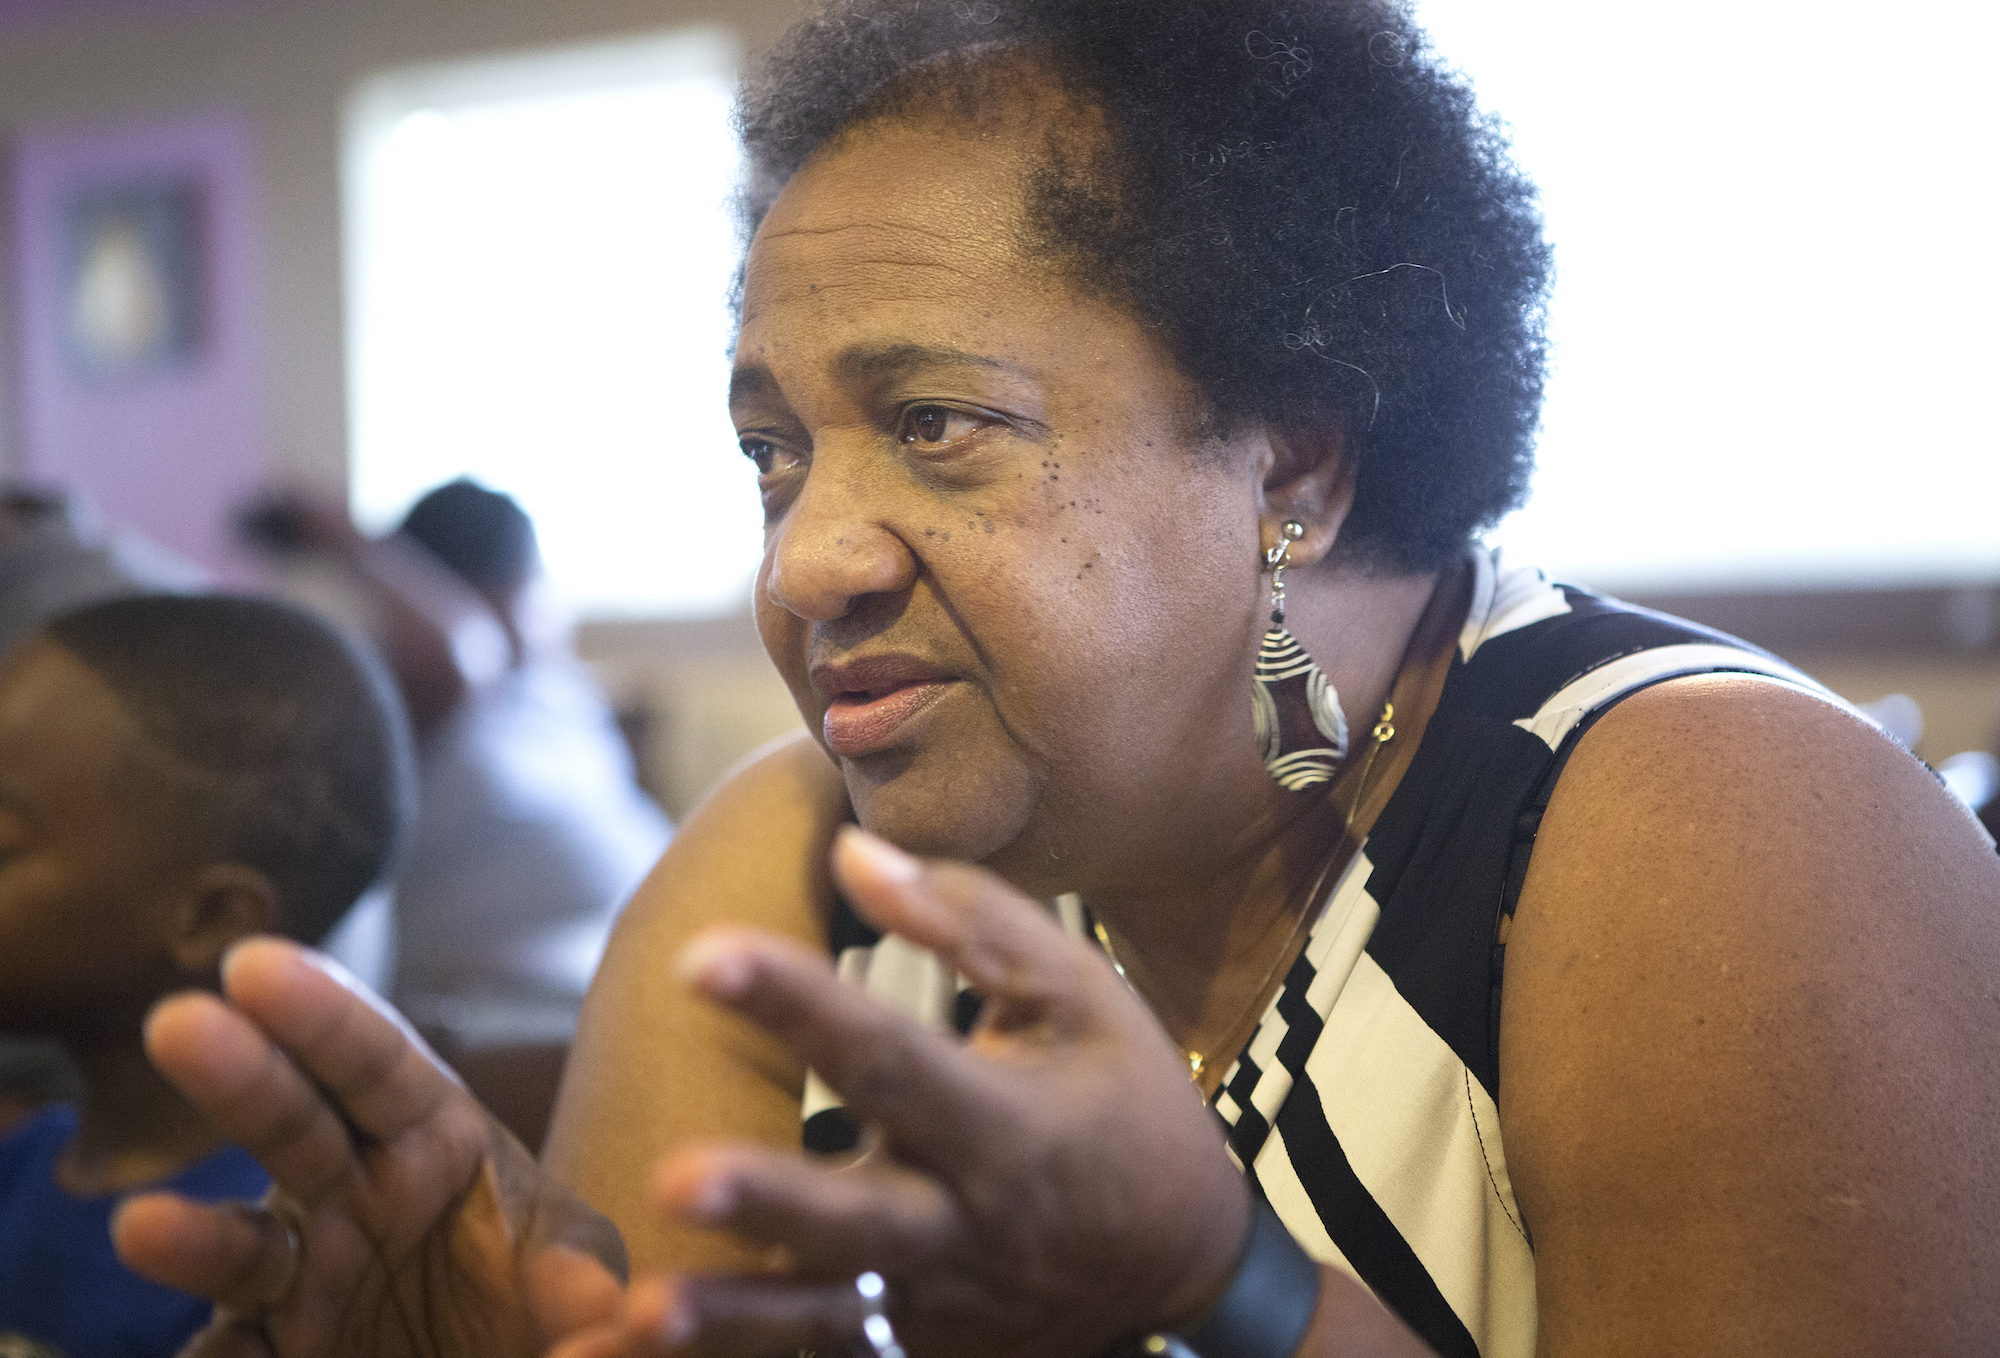 Shirley Weber in conversation. (Photo by Evan Lewis for CALmatters)